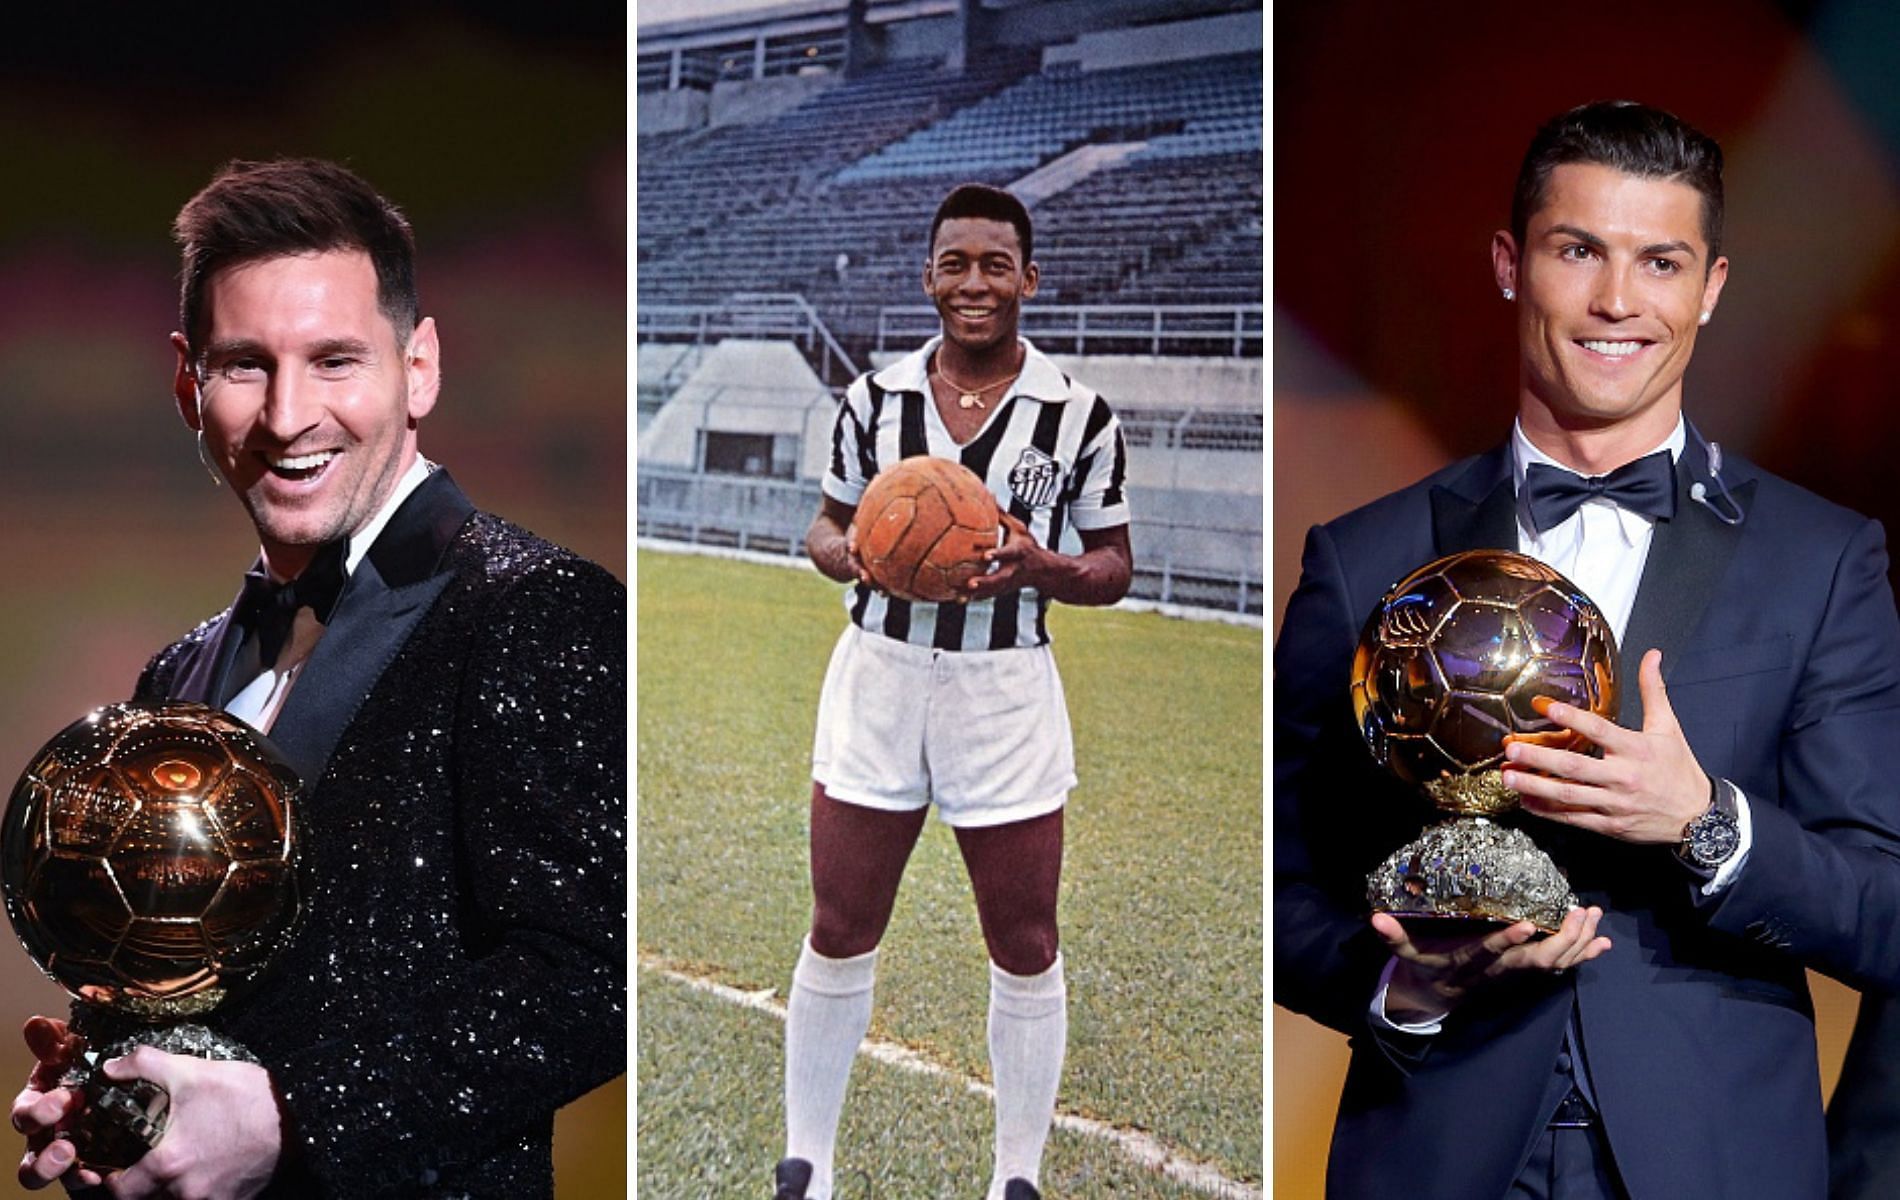 10 of the Greatest Men's Soccer Players of All Time